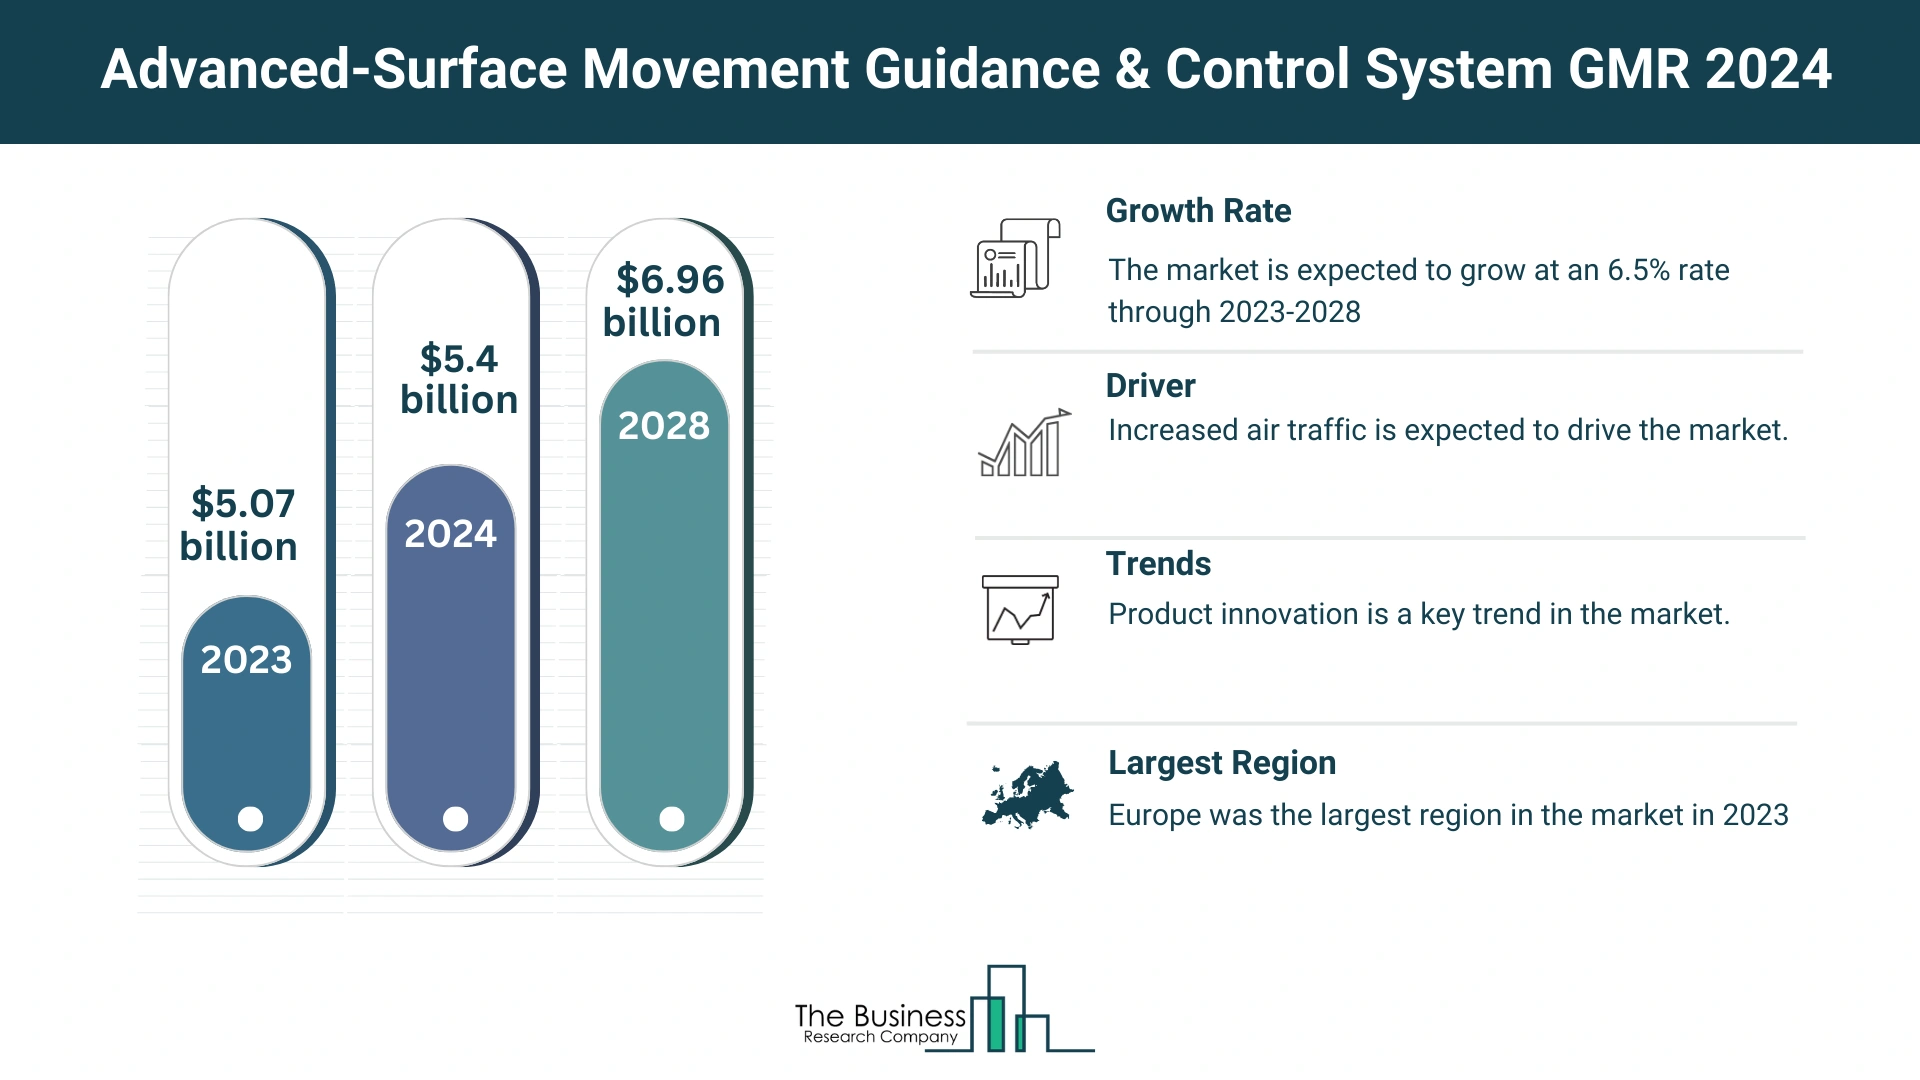 Global Advanced-Surface Movement Guidance & Control System (A-SMGCS) Market